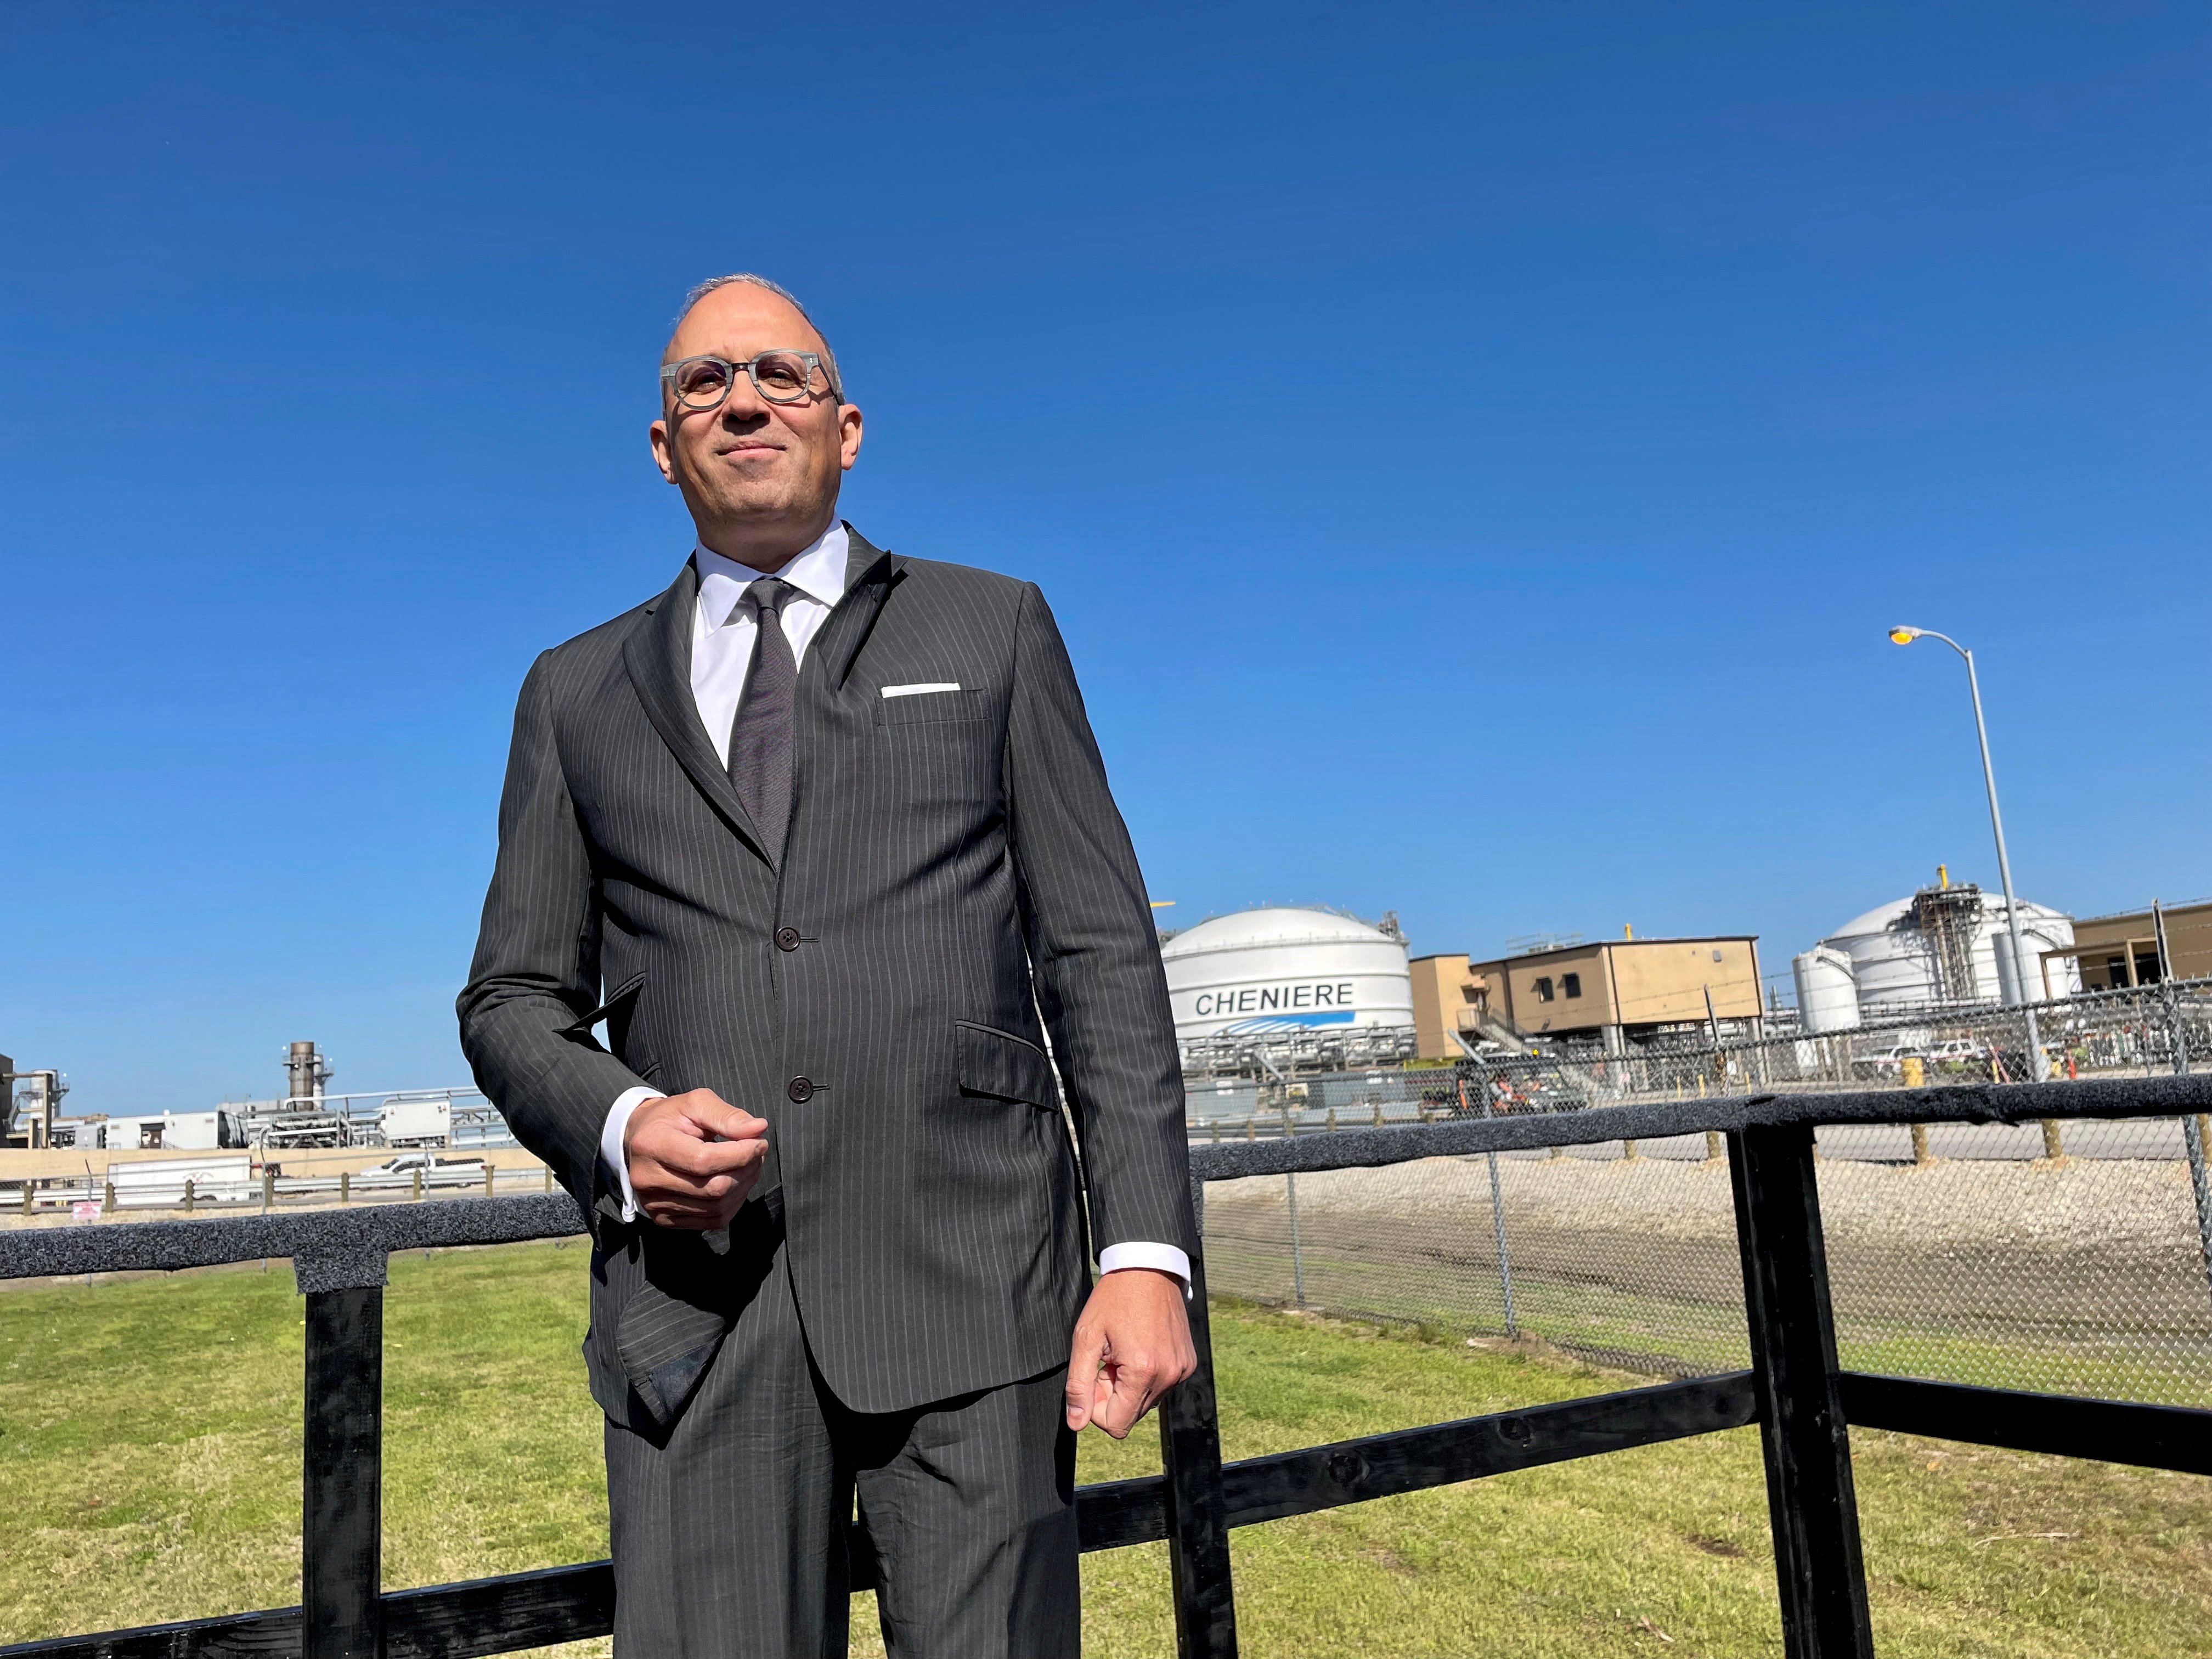 Executive Vice President and Chief Commercial Officer of Cheniere Energy Anatol Feygin poses for a photo near the Cheniere Sabine Pass LNG export unit in Cameron Parish, Louisiana